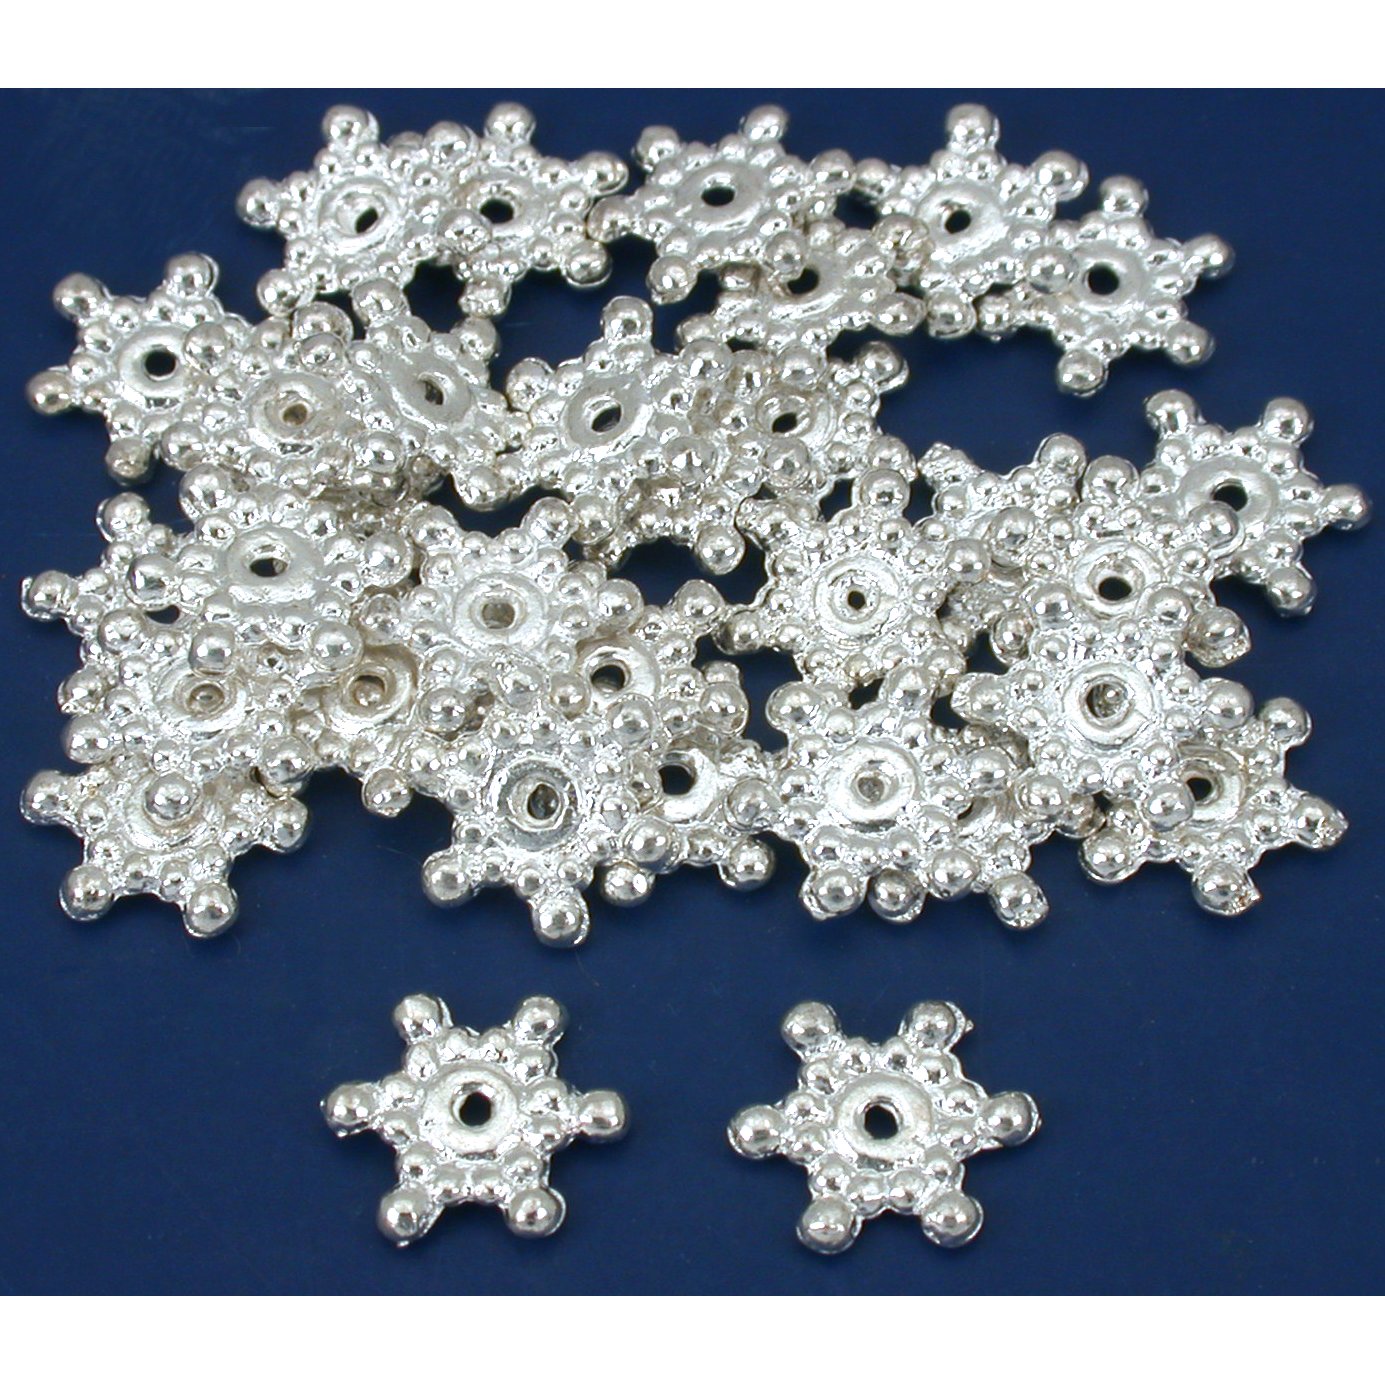 Bali Spacer Flower Beads Silver Plated 12mm 30Pcs Approx.